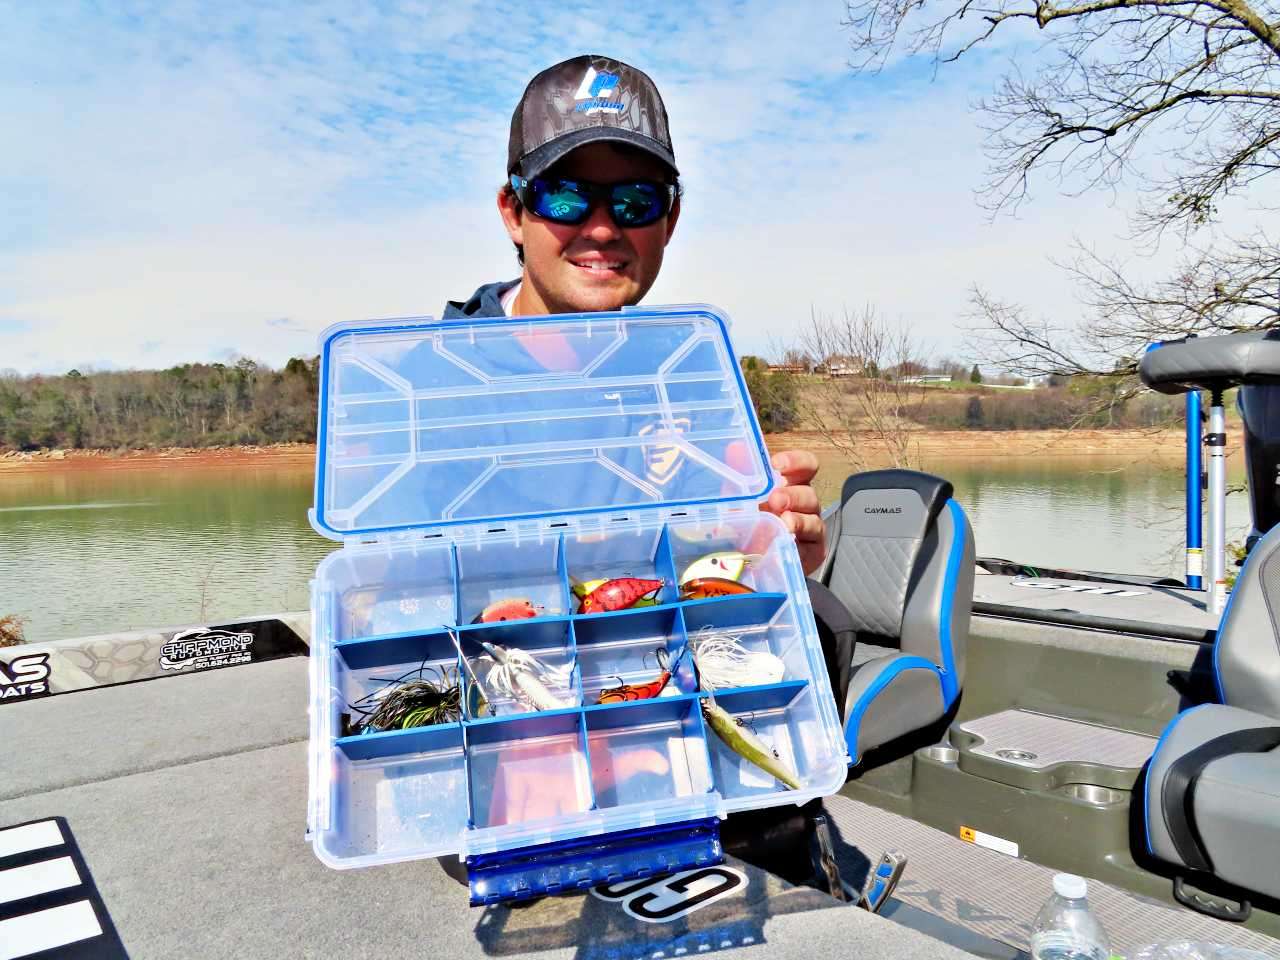 This weekender tacklebox has everything needed for prespawn, spawn and postspawn fishing on Hamiltonâs home lake. Nearby are the tourist towns of Sevierville, Pigeon Forge and Gatlinburg, making a trip here packed with fun and value.